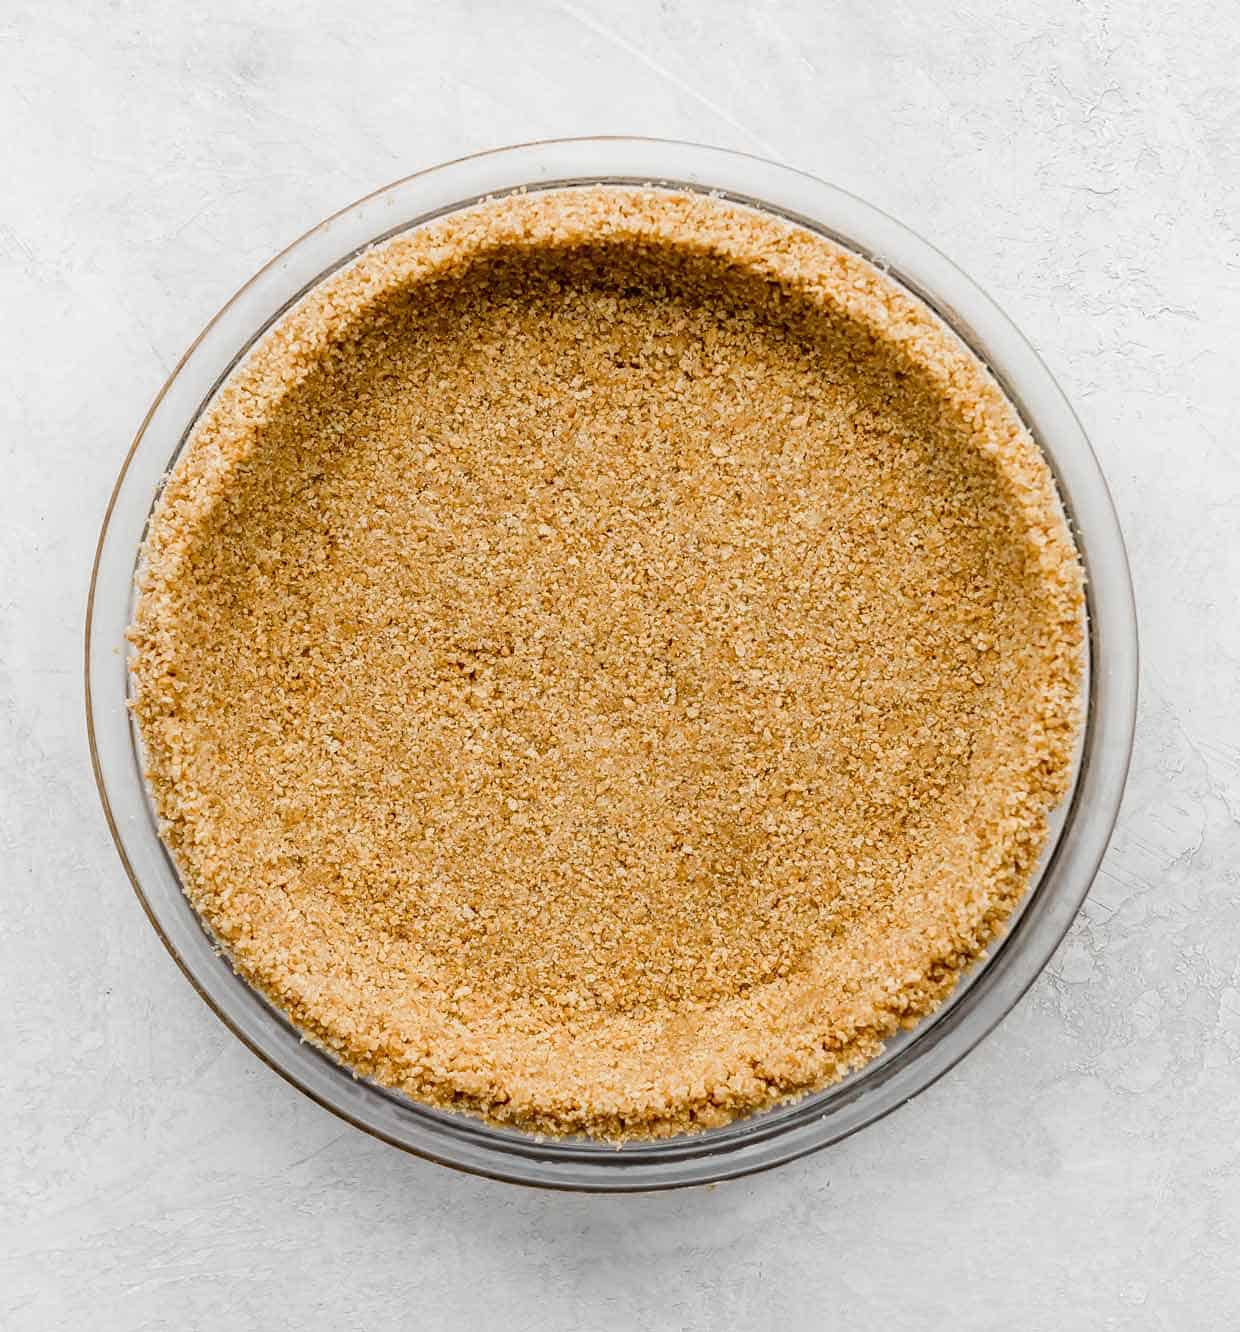 A Graham Cracker Crust in a 9 inch glass pie plate on a light gray background.